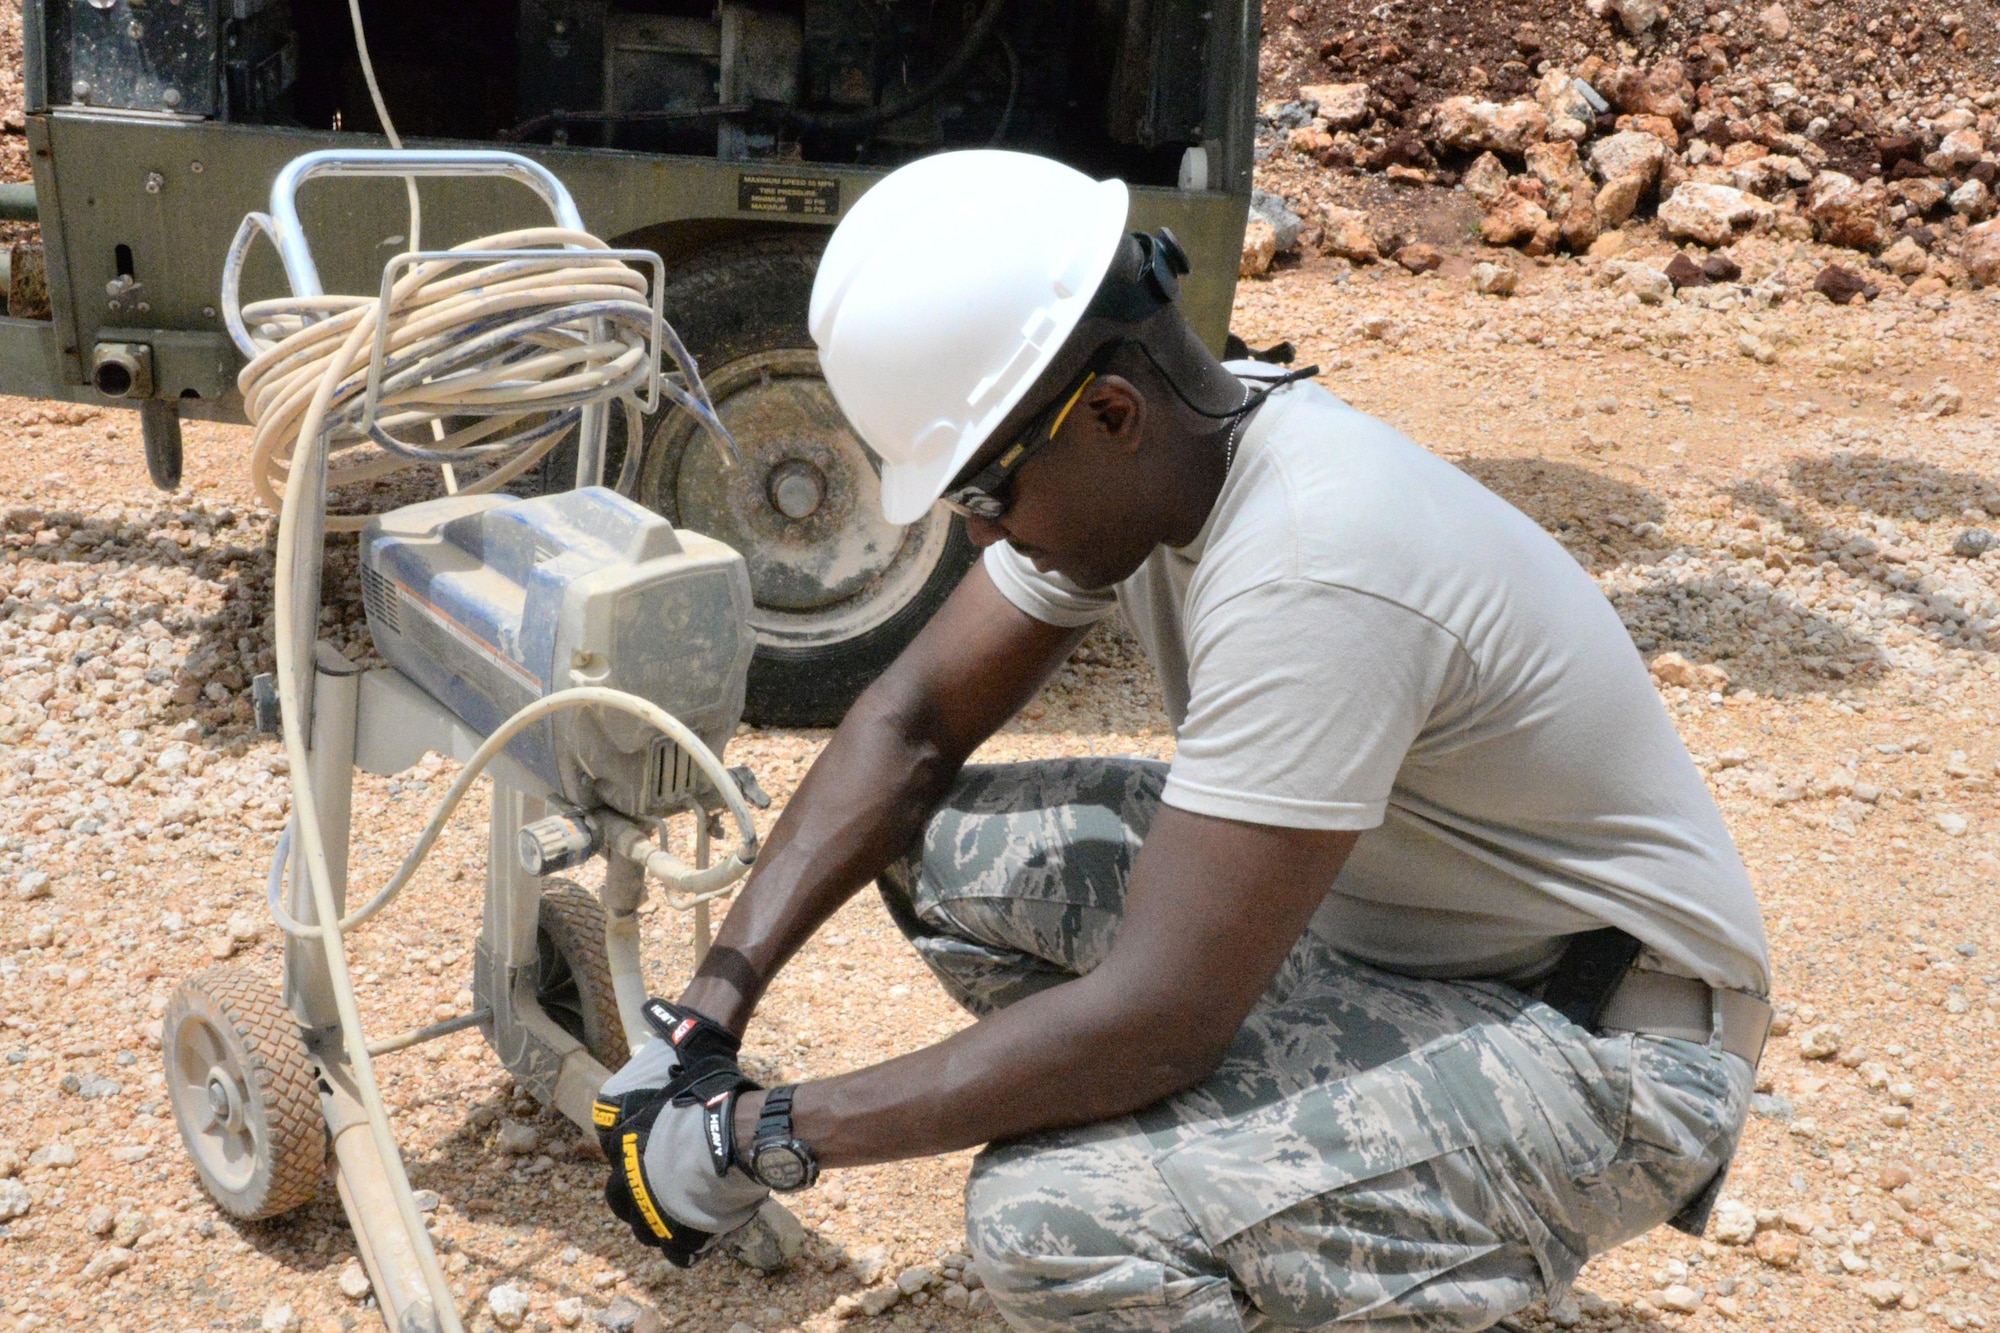 U.S. Air Force Airman assigned to the 181st Intelligence Wing Civil Engineering Squadron prepares a paint sprayer for use during his annual training at Andersen AFB, Guam, July 13, 2016. The 181st engineers provided contingency related hands-on training for Air National Guard CE Airmen. (U.S. Air National Guard photo by Senior Airman Lonnie Wiram)